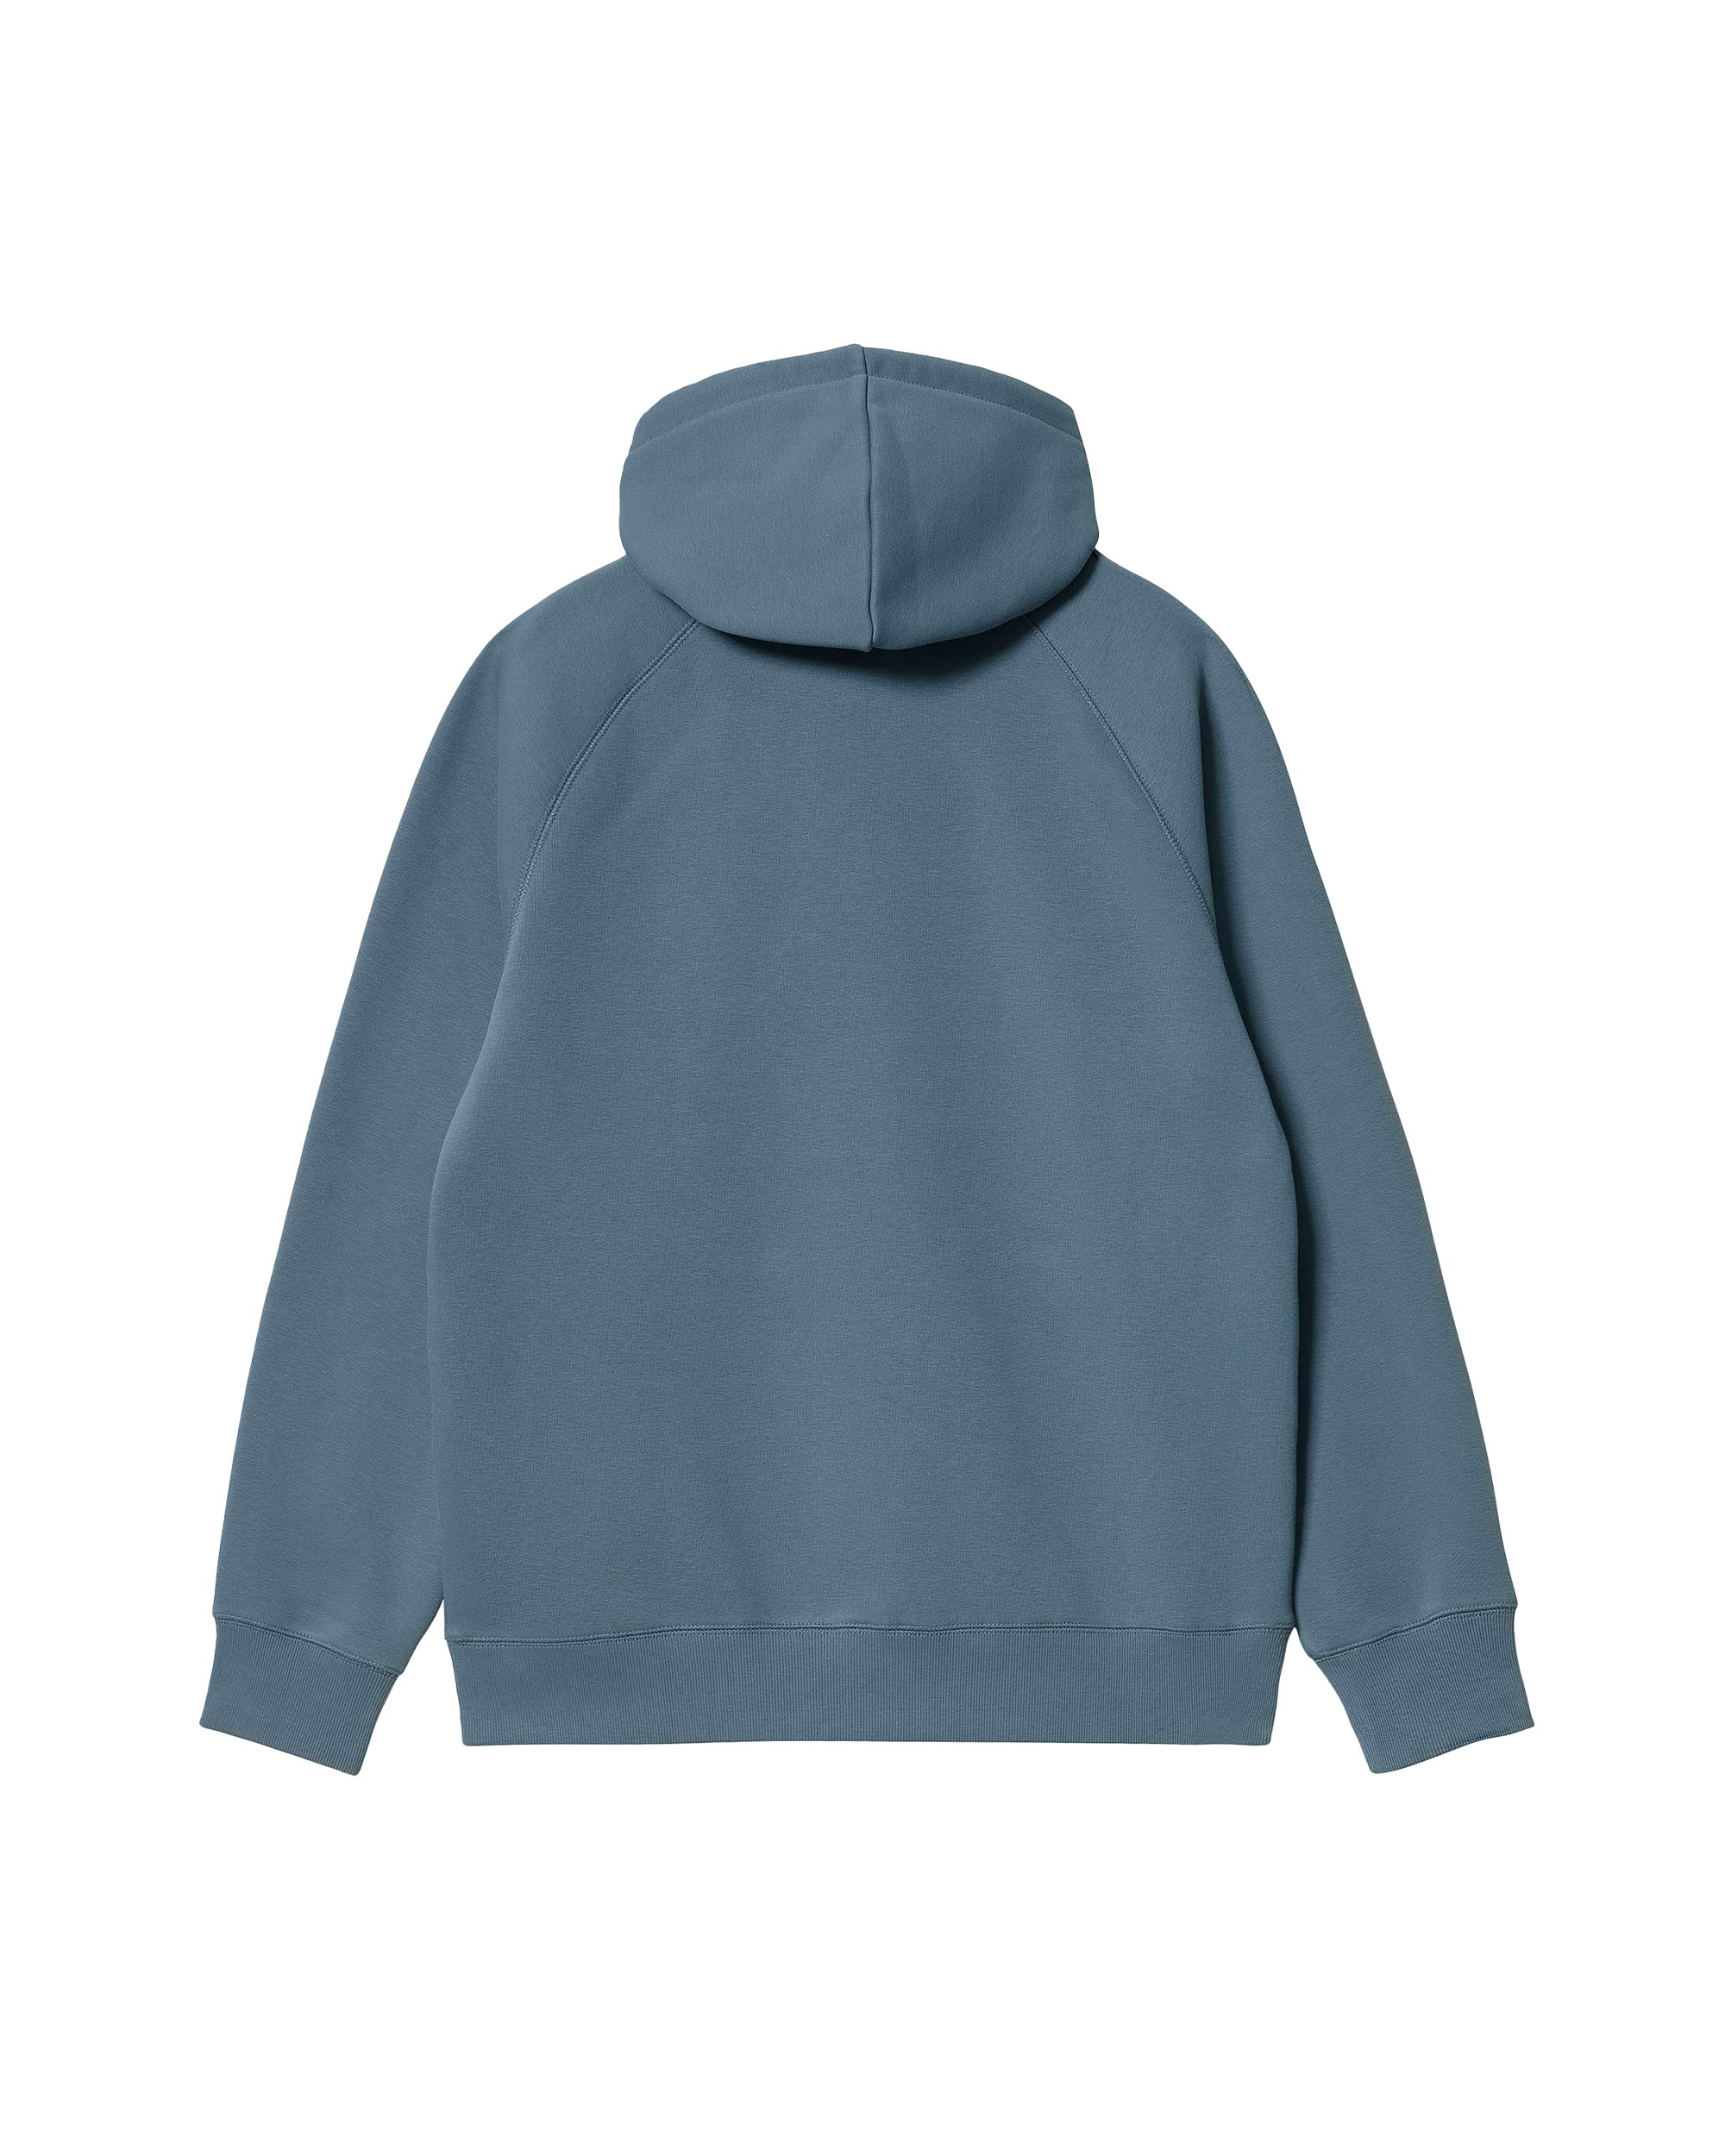 Chase Hooded Sweatshirt - Storm Blue / Gold